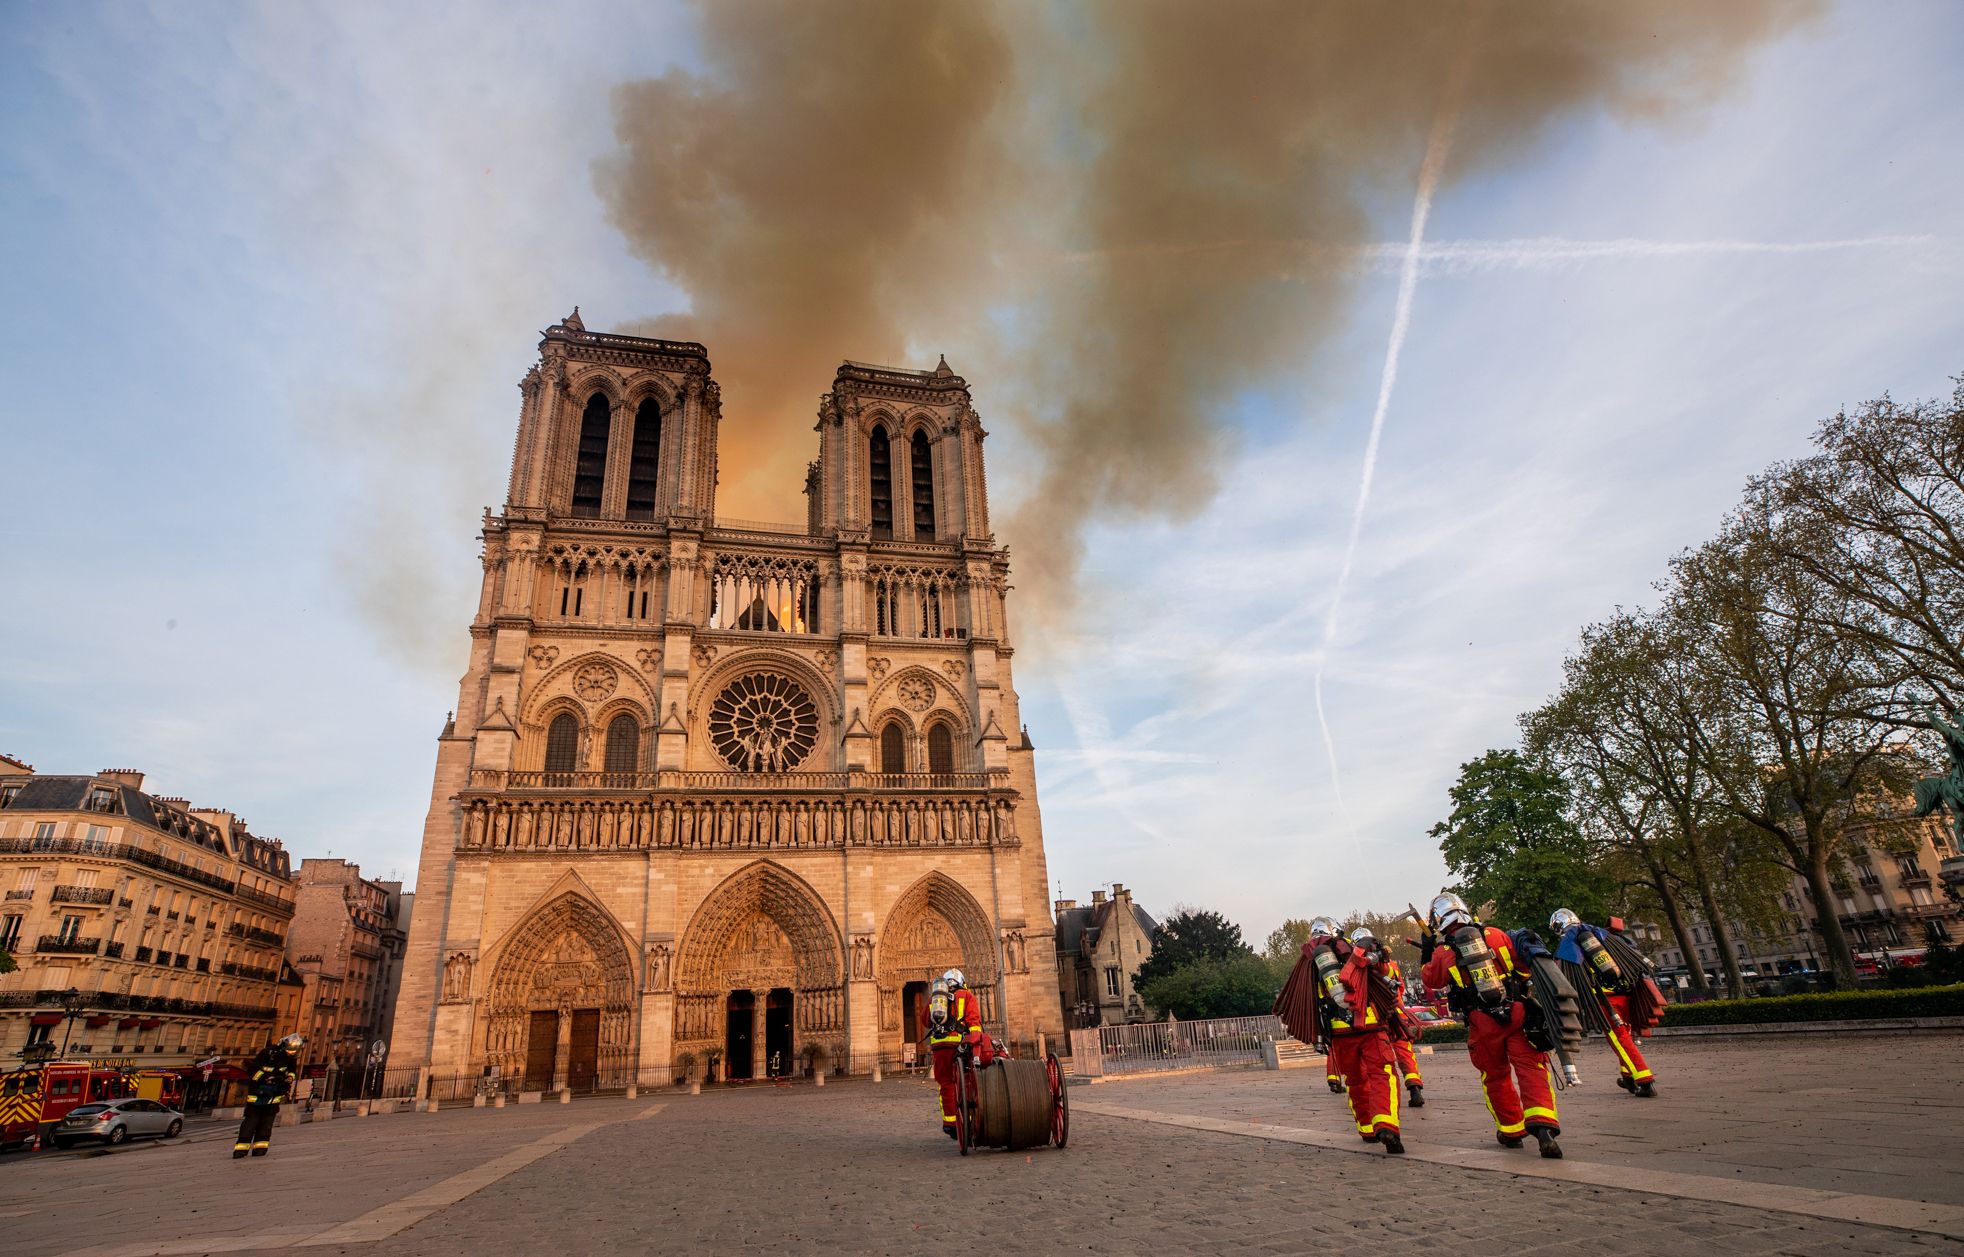 Notre Dame Cathedral to Celebrate First Mass Since Fire The Tablet